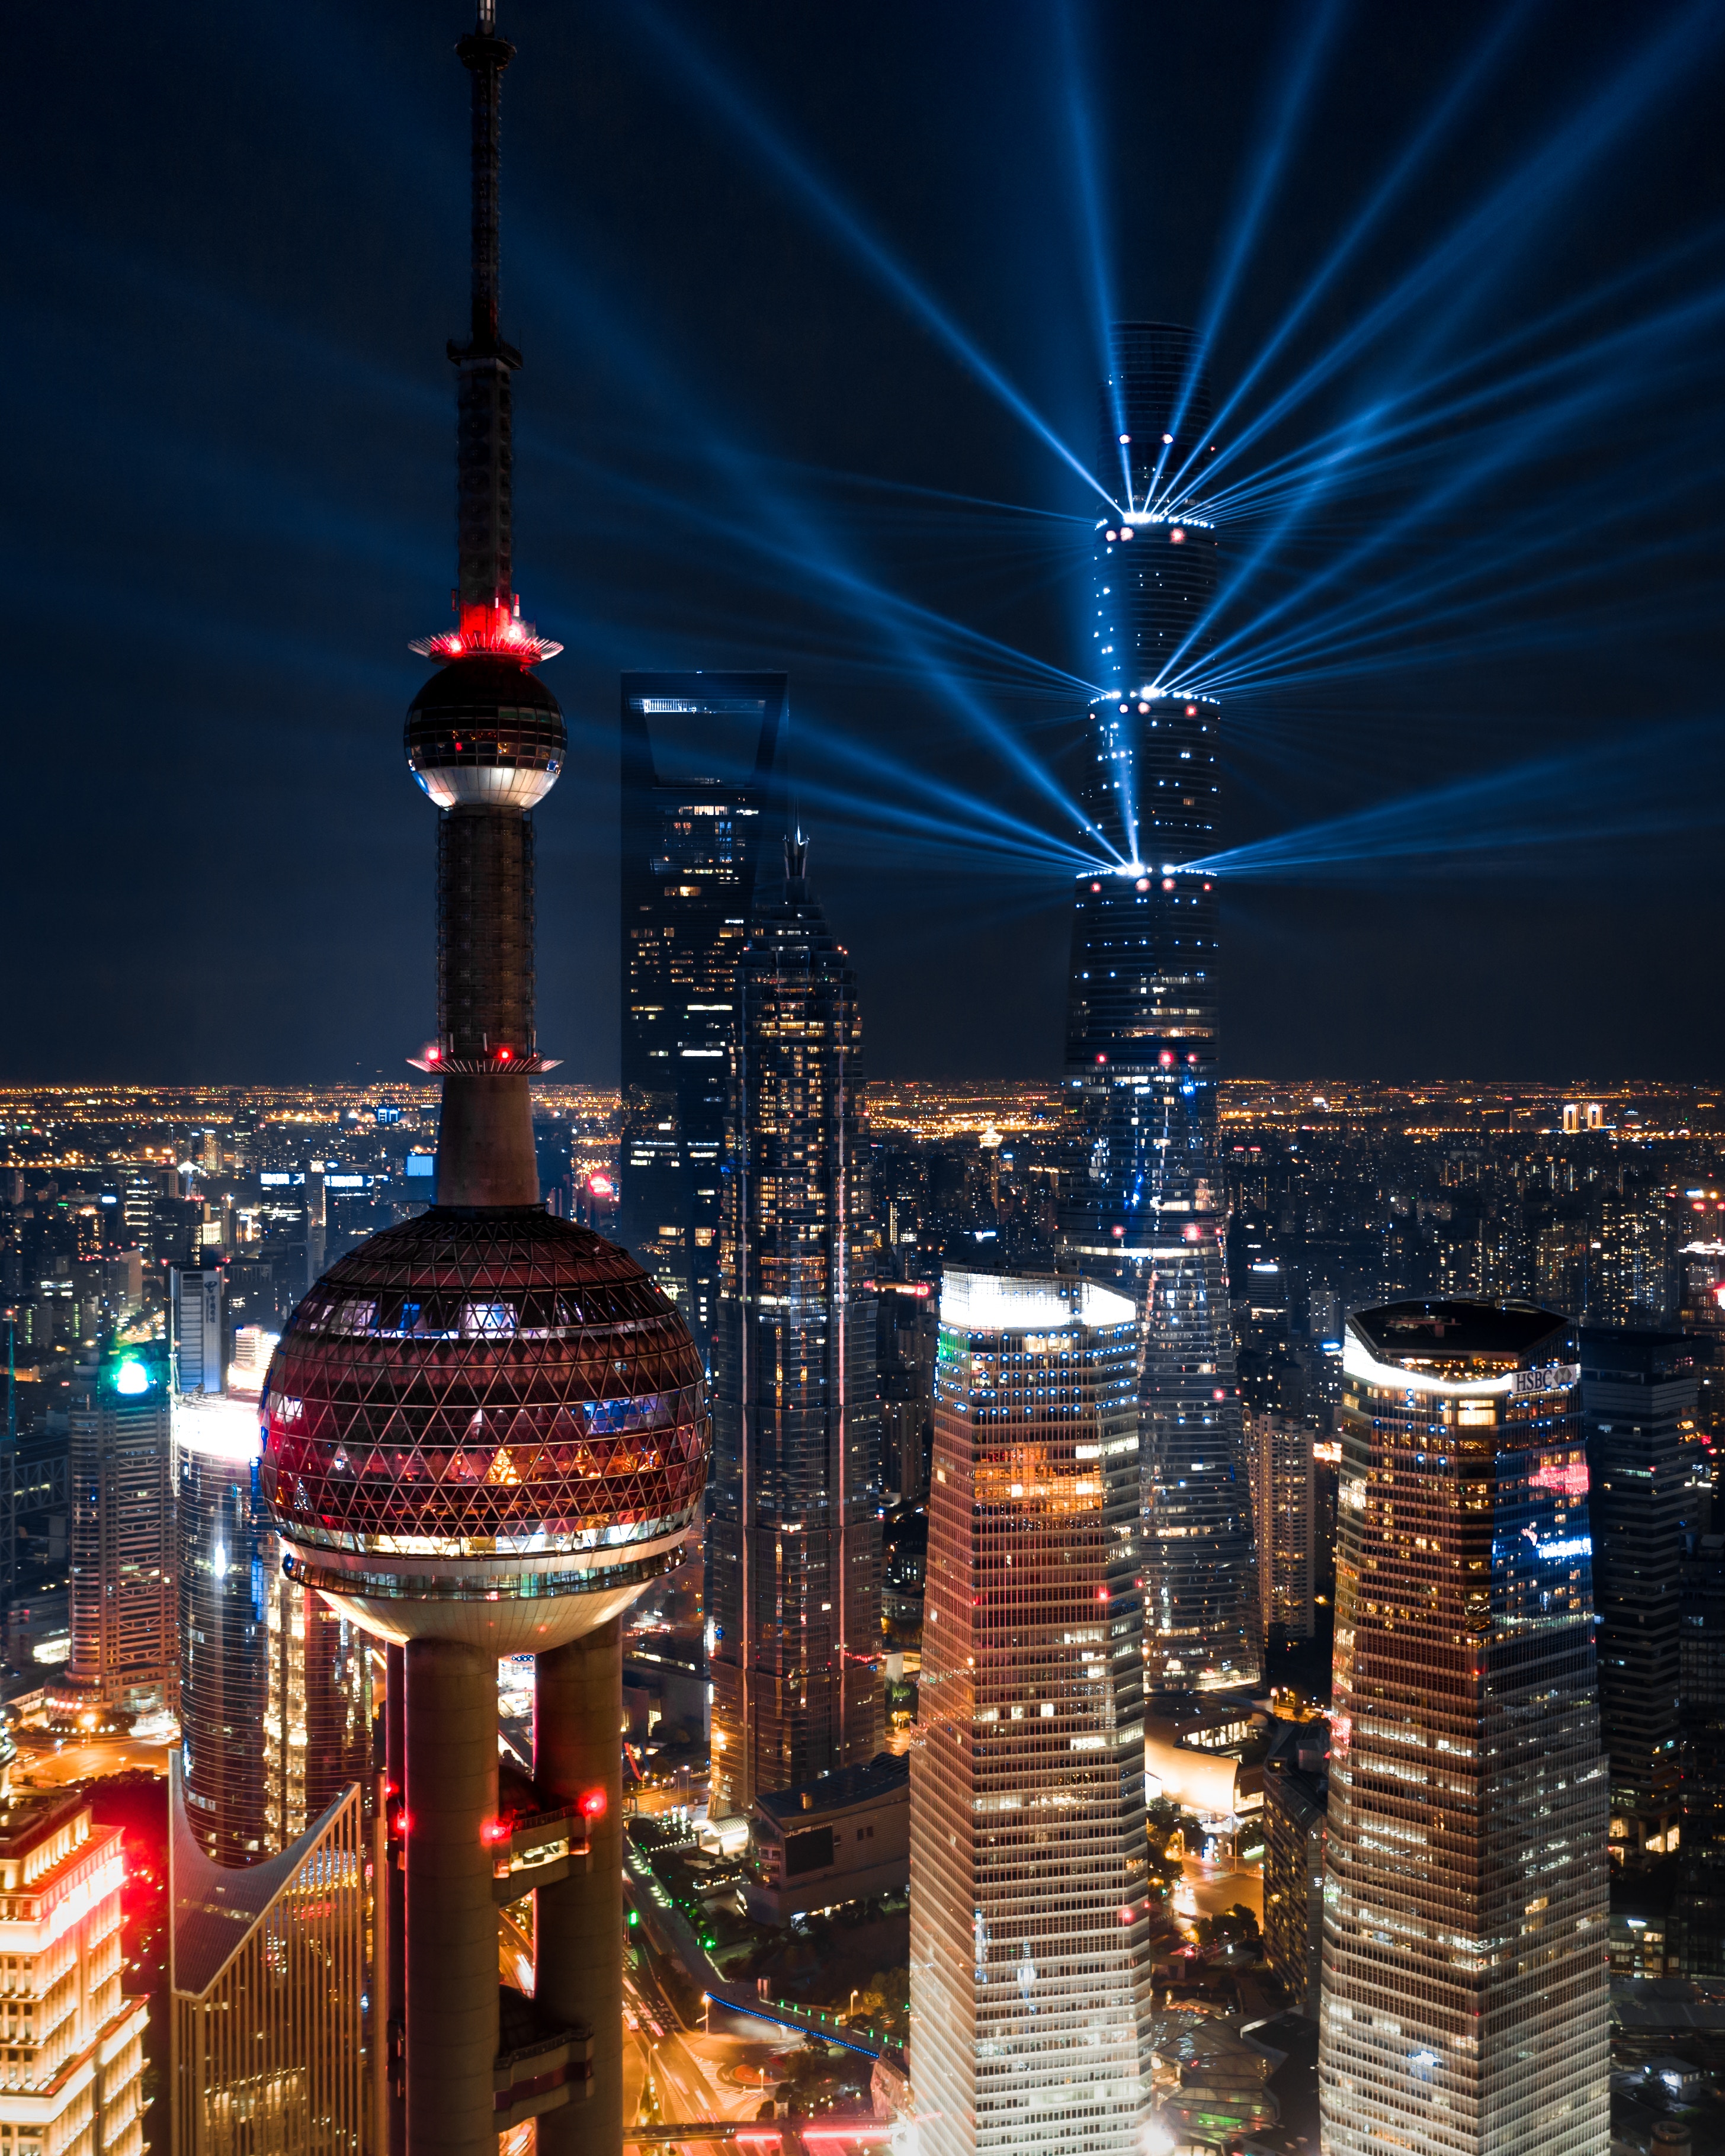 skyscrapers, night city, architecture, cities, view from above, city lights images